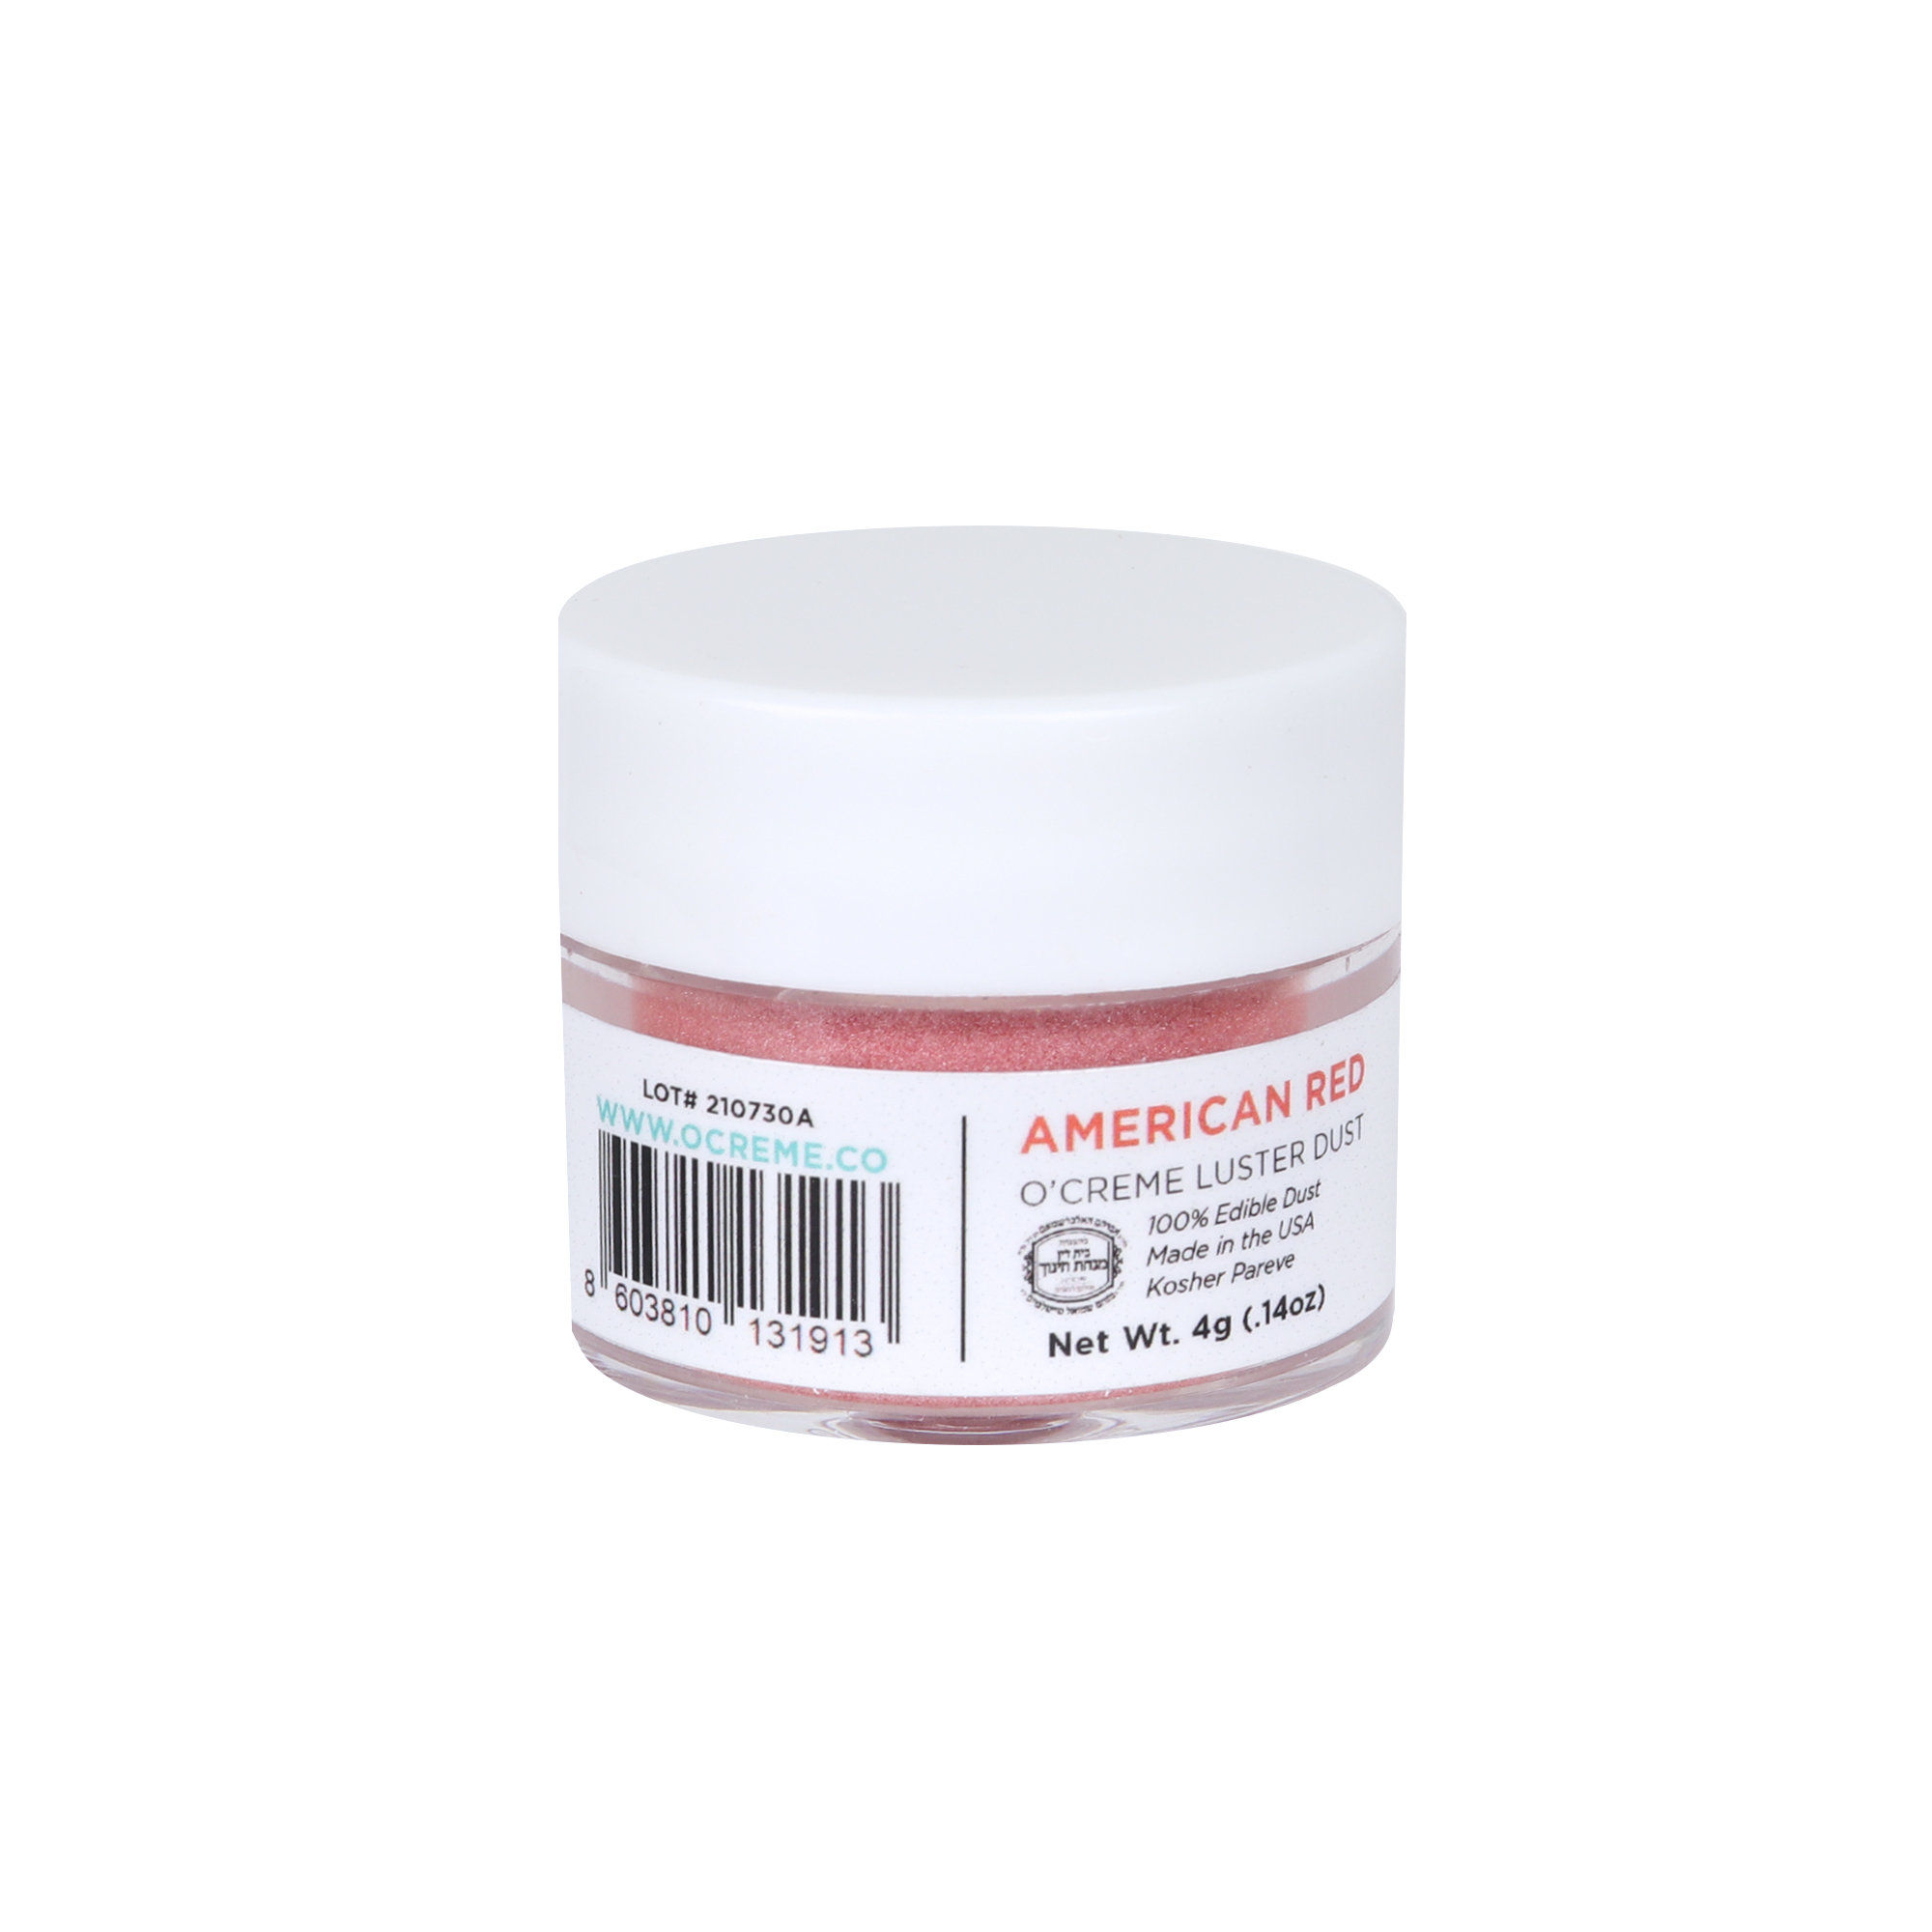 O'Creme American Red Luster Dust, 4 gr. image 1